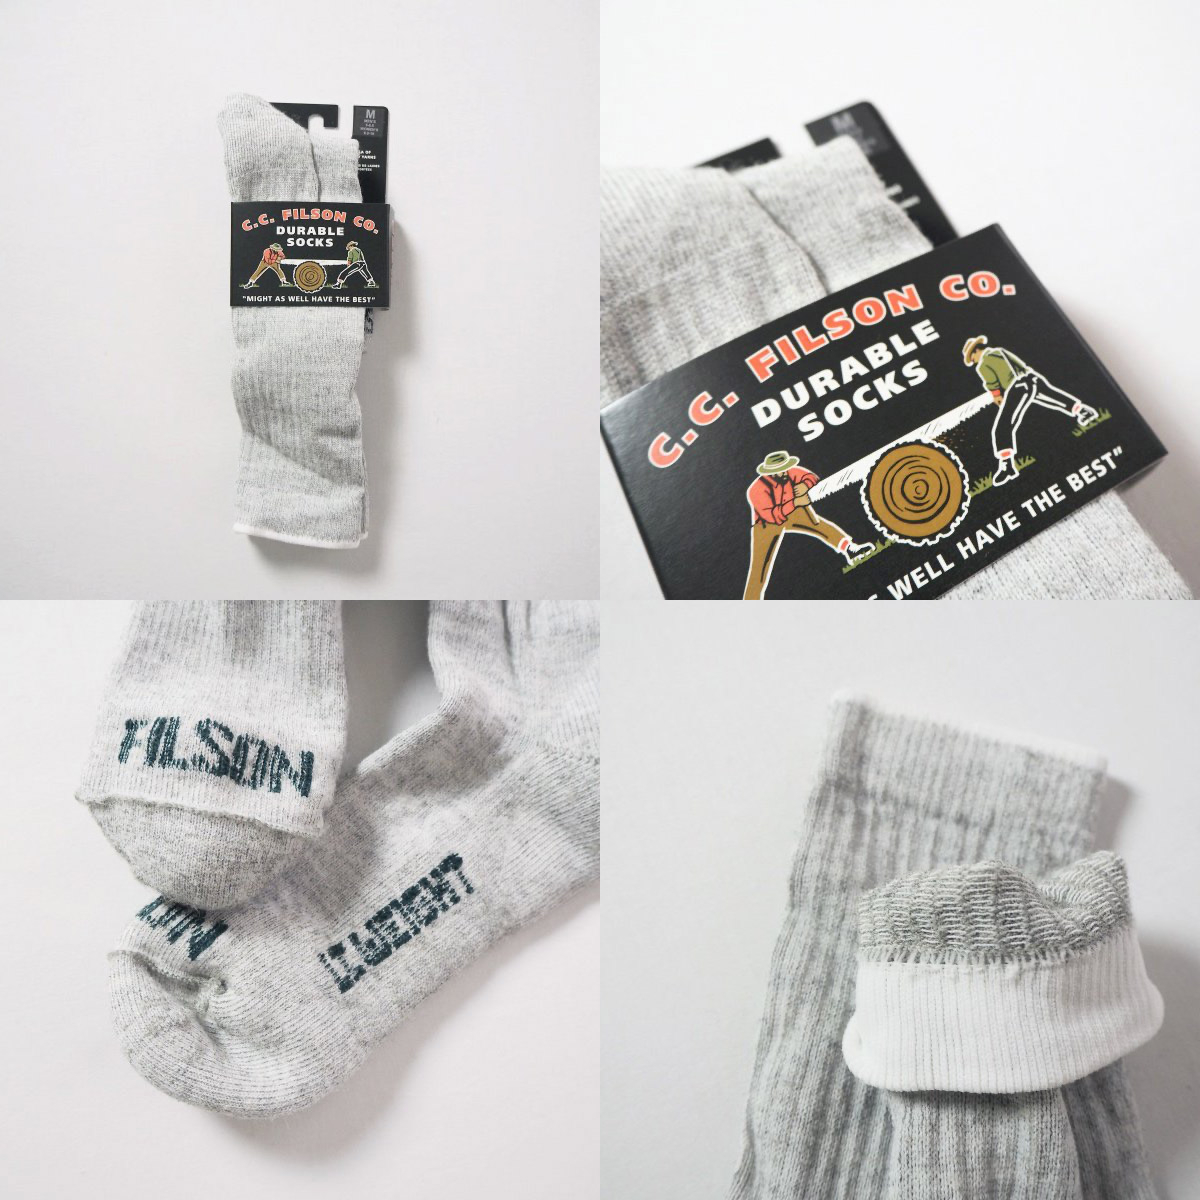 Filson Lightweight Traditional Crew Socks use merino wool with a touch of nylon and spandex